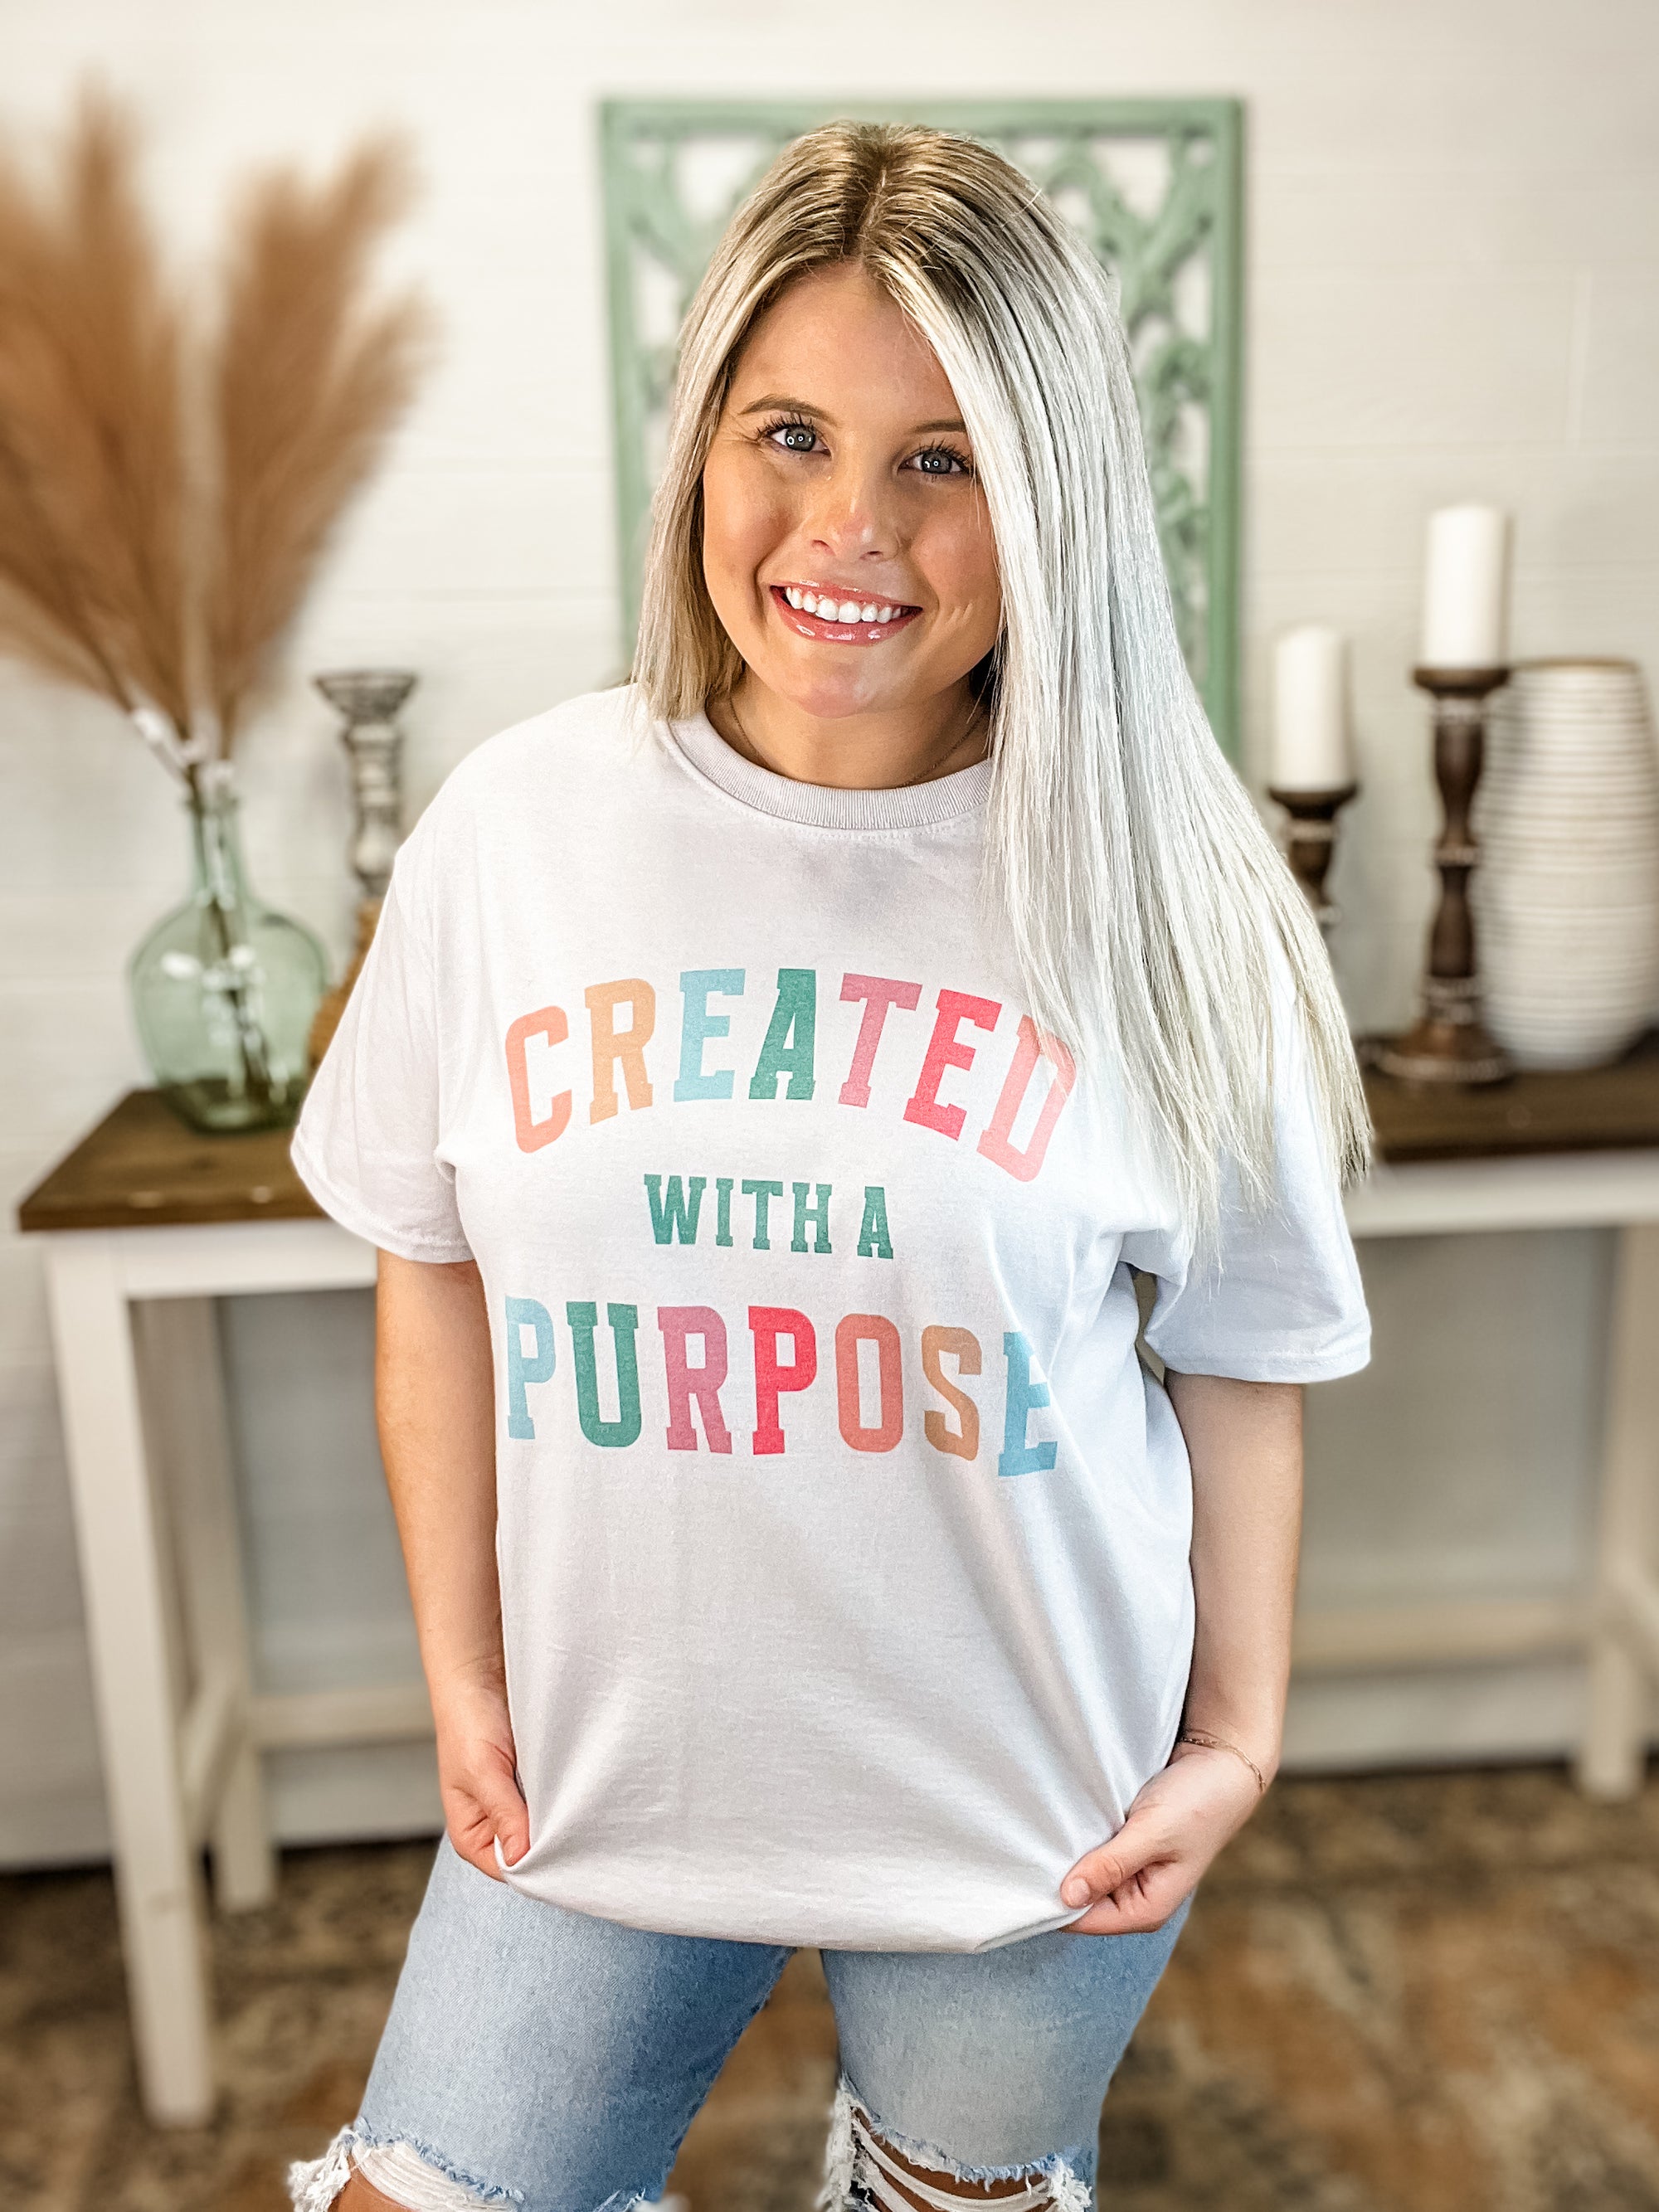 "CREATED WITH A PURPOSE" Graphic Tee